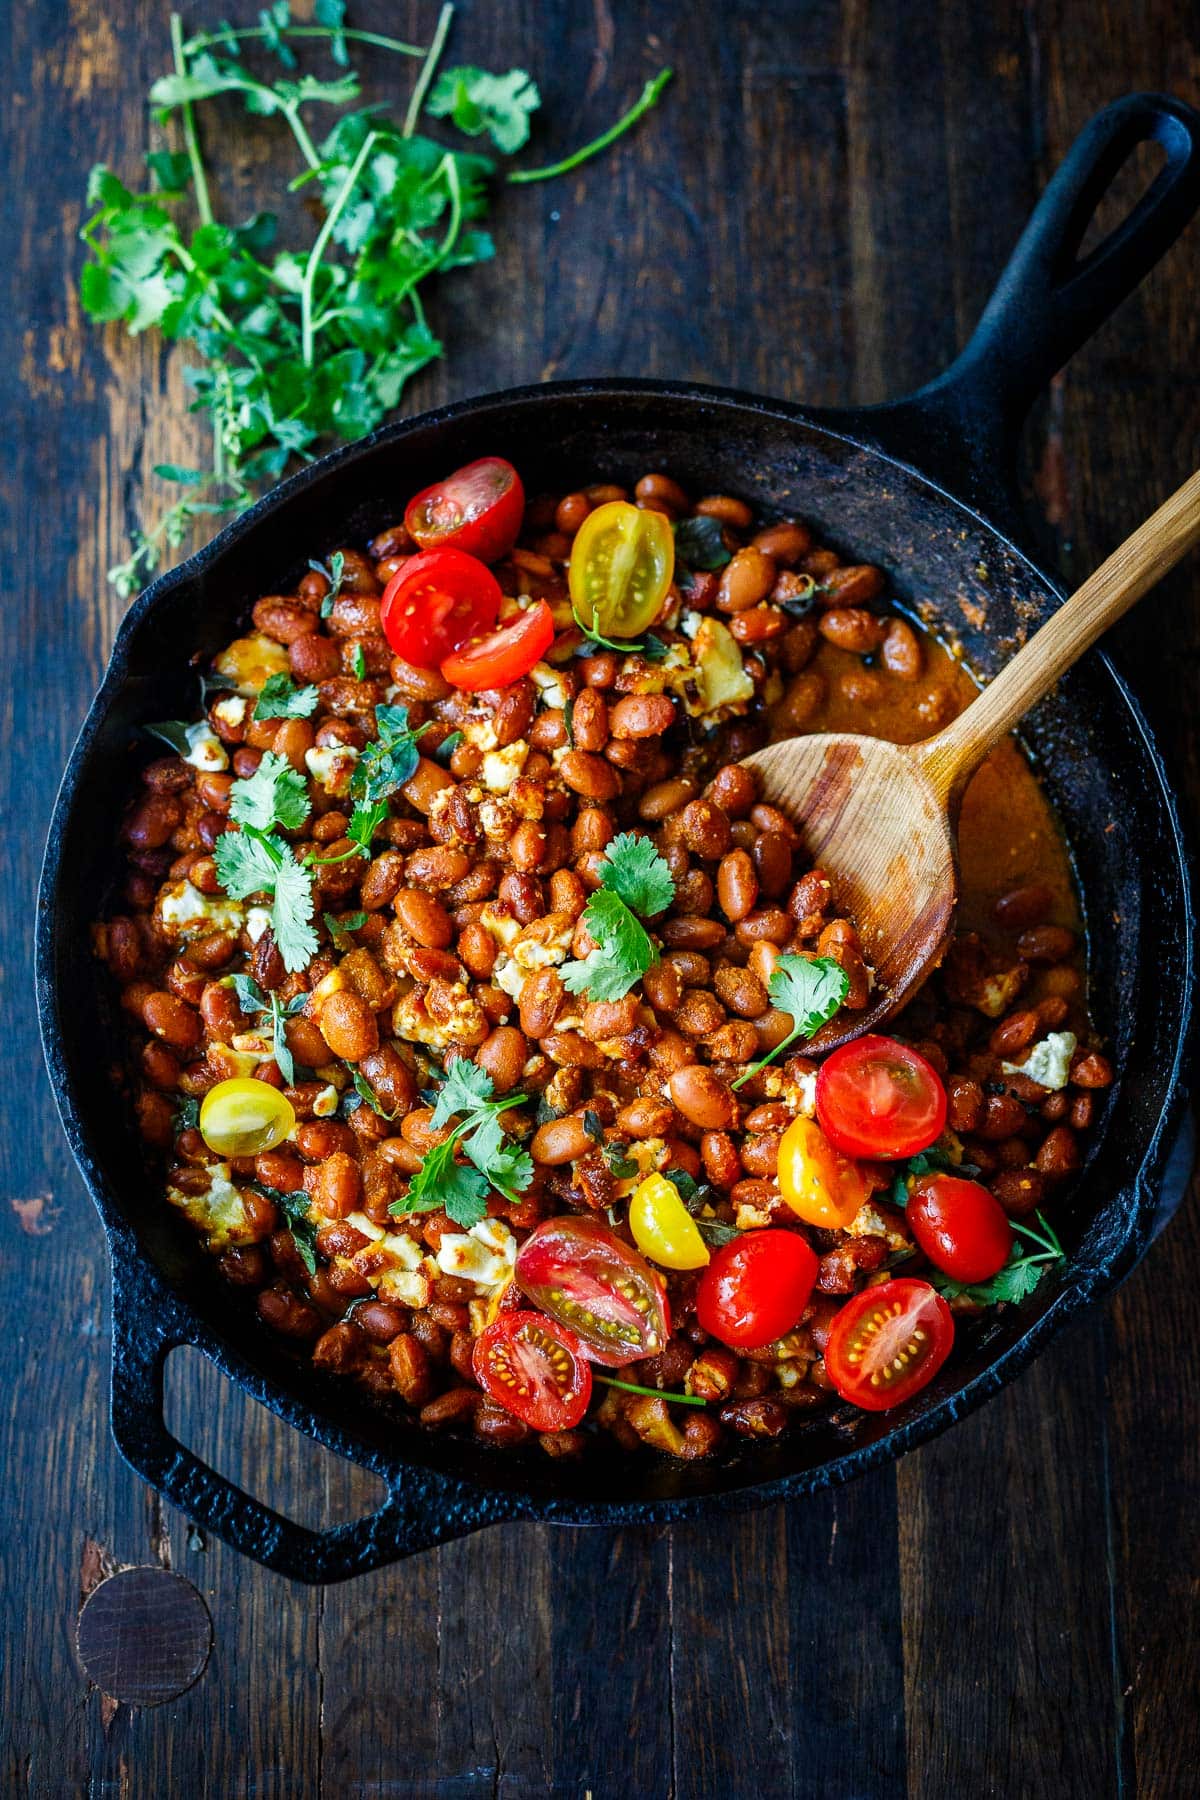 Baked pinto beans beans topped with tomatoes and cilantro 